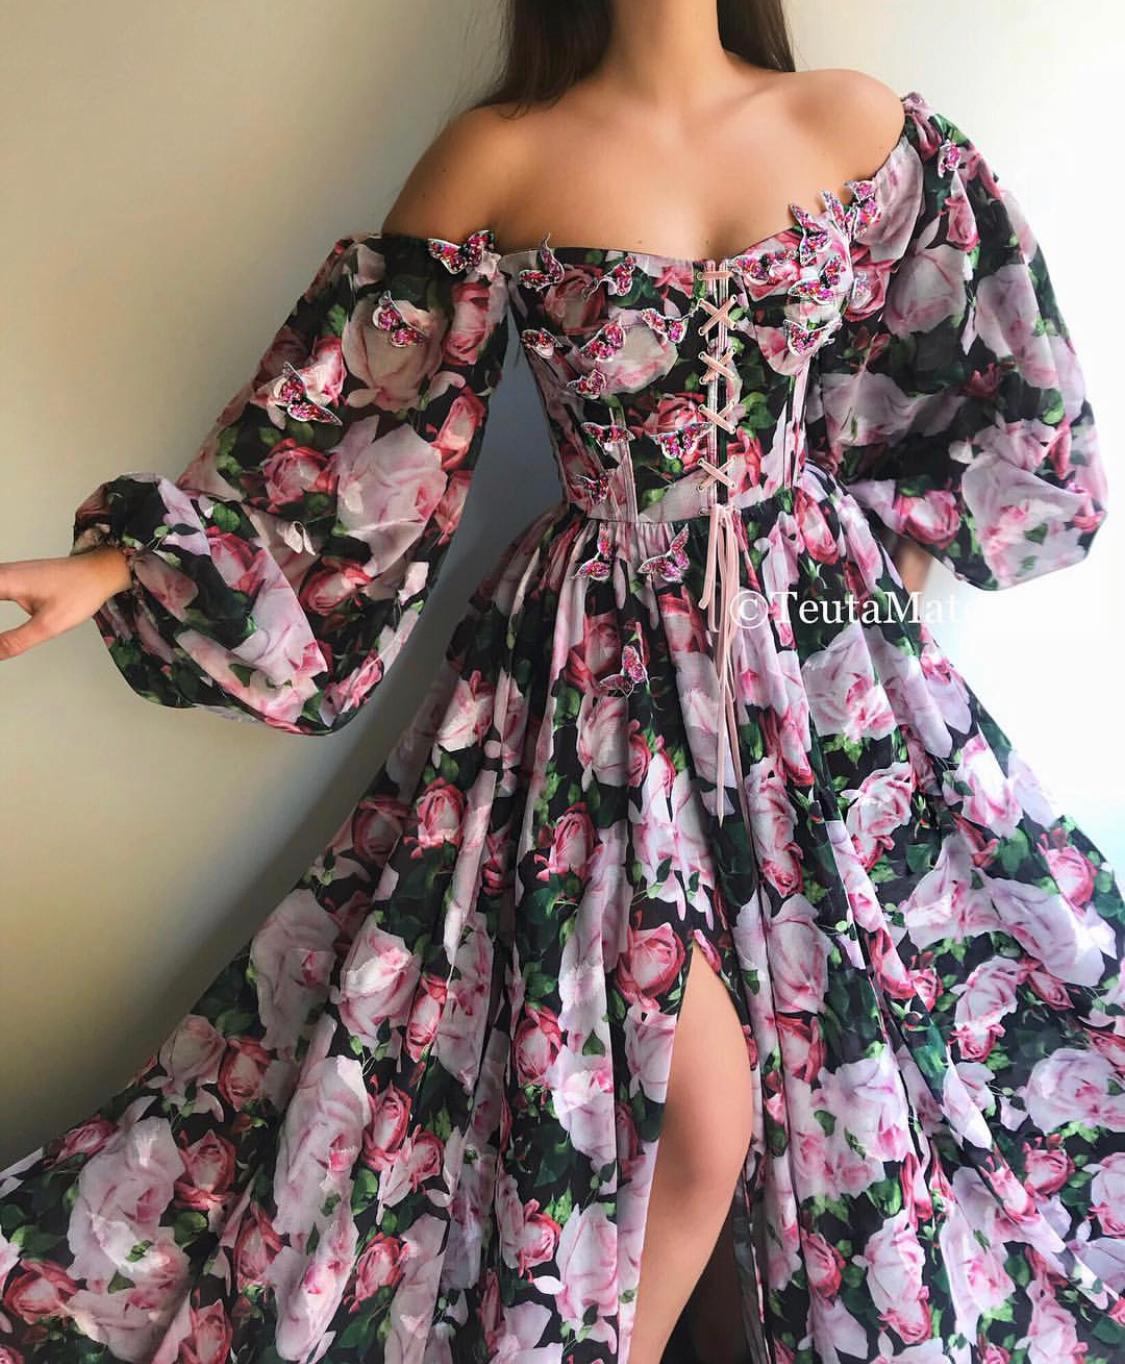 Purple A-Line dress with long off the shoulder sleeves and printed flowers